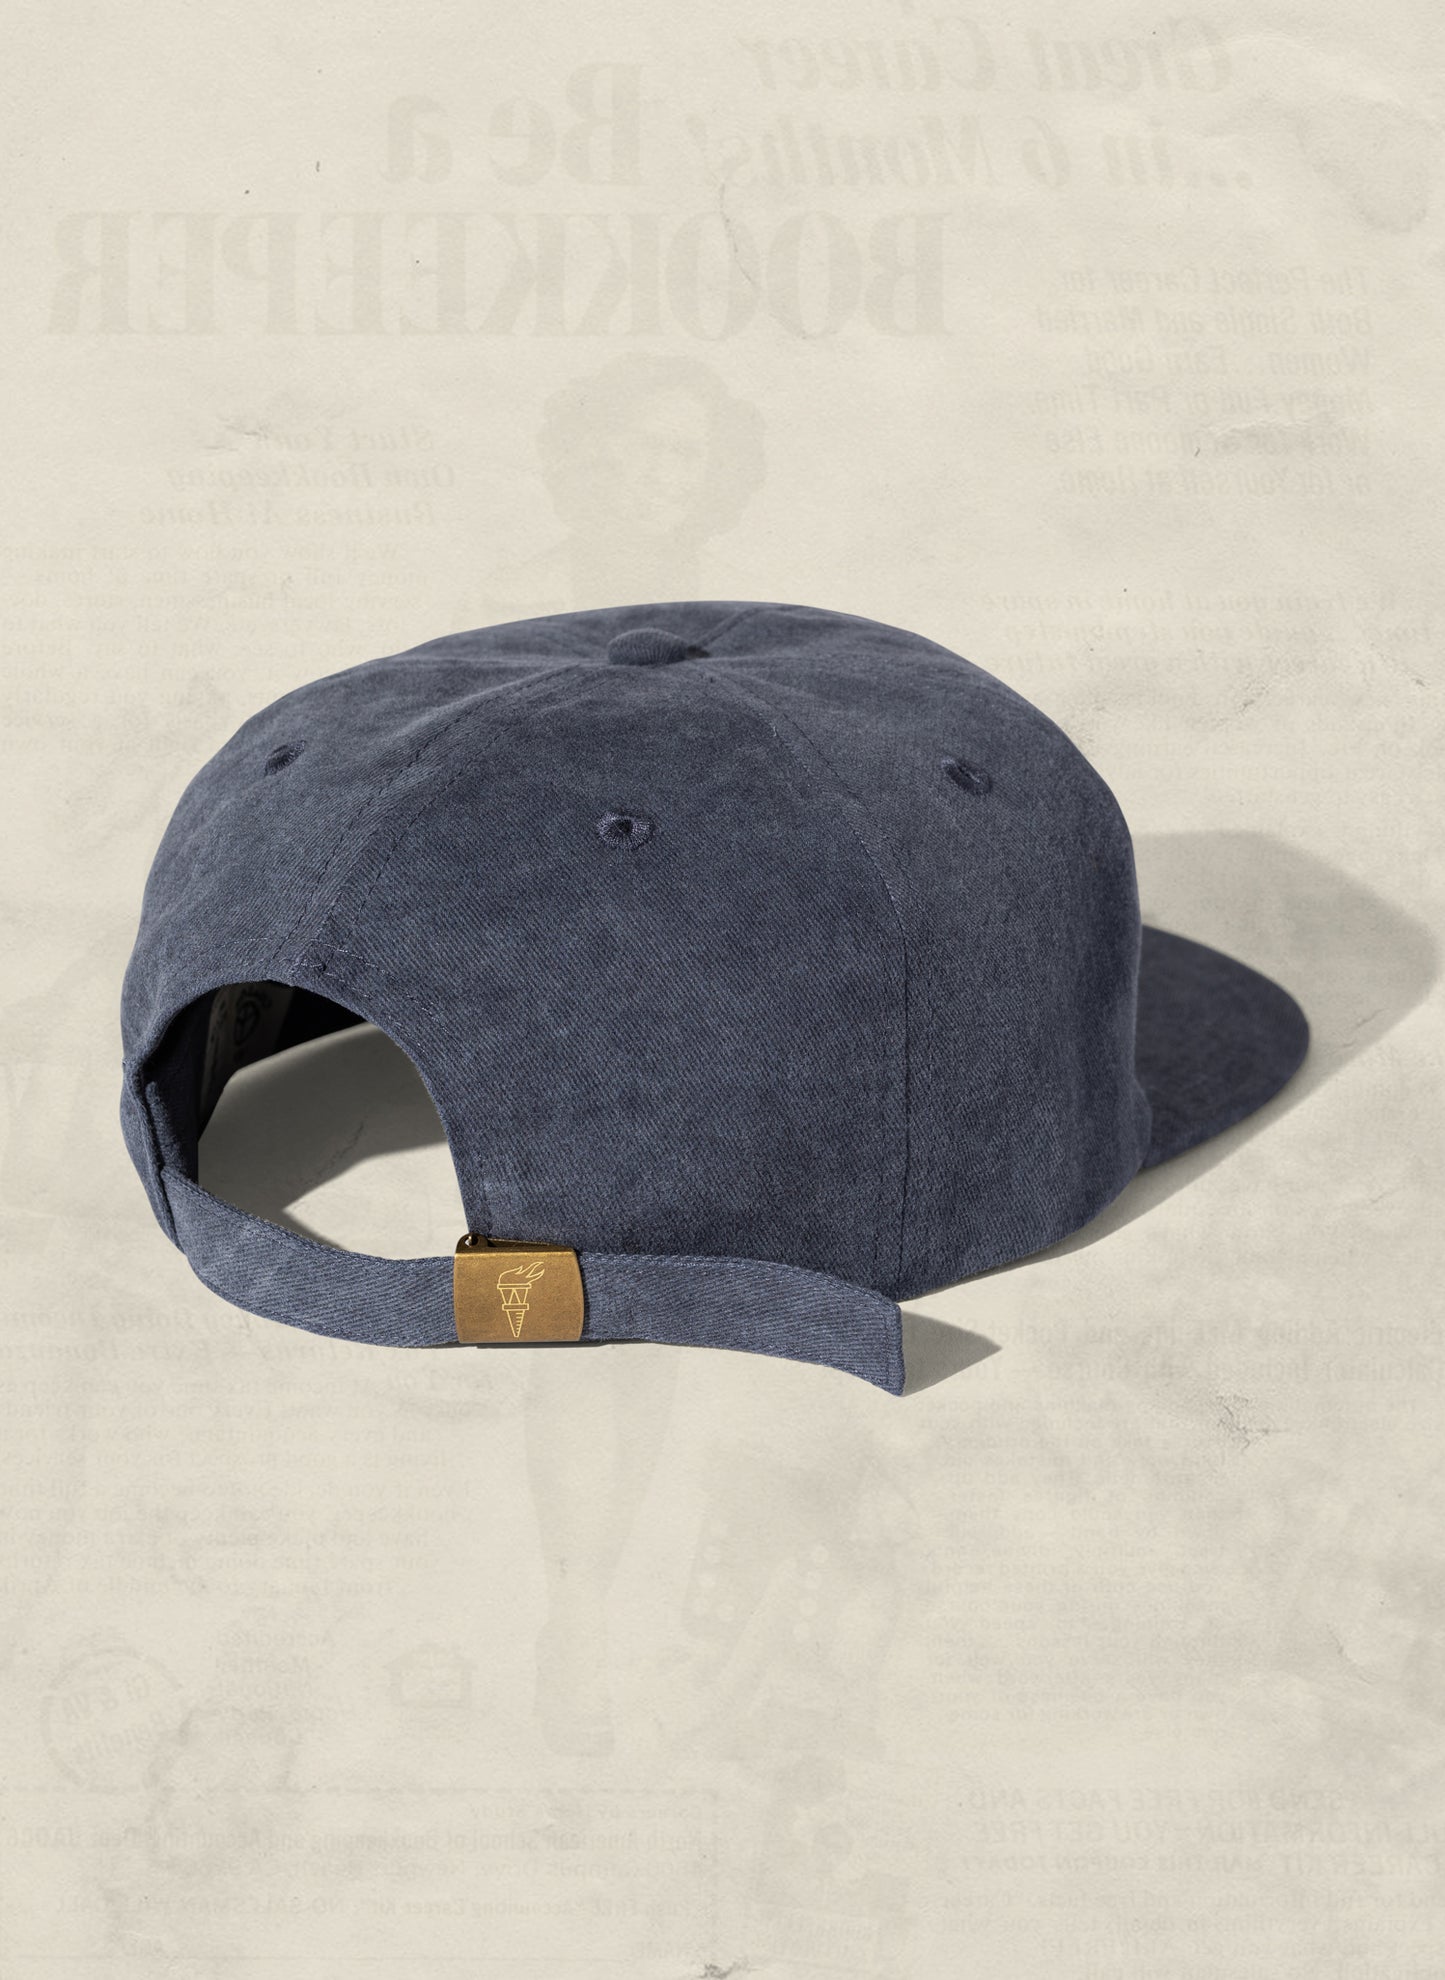 Weld Mfg Washed Brushed Cotton Twill Pigment Dyed Unstructured 5 Panel Vintage Inspired Baseball Strapback Hat - Laid Back Headwear - Navy